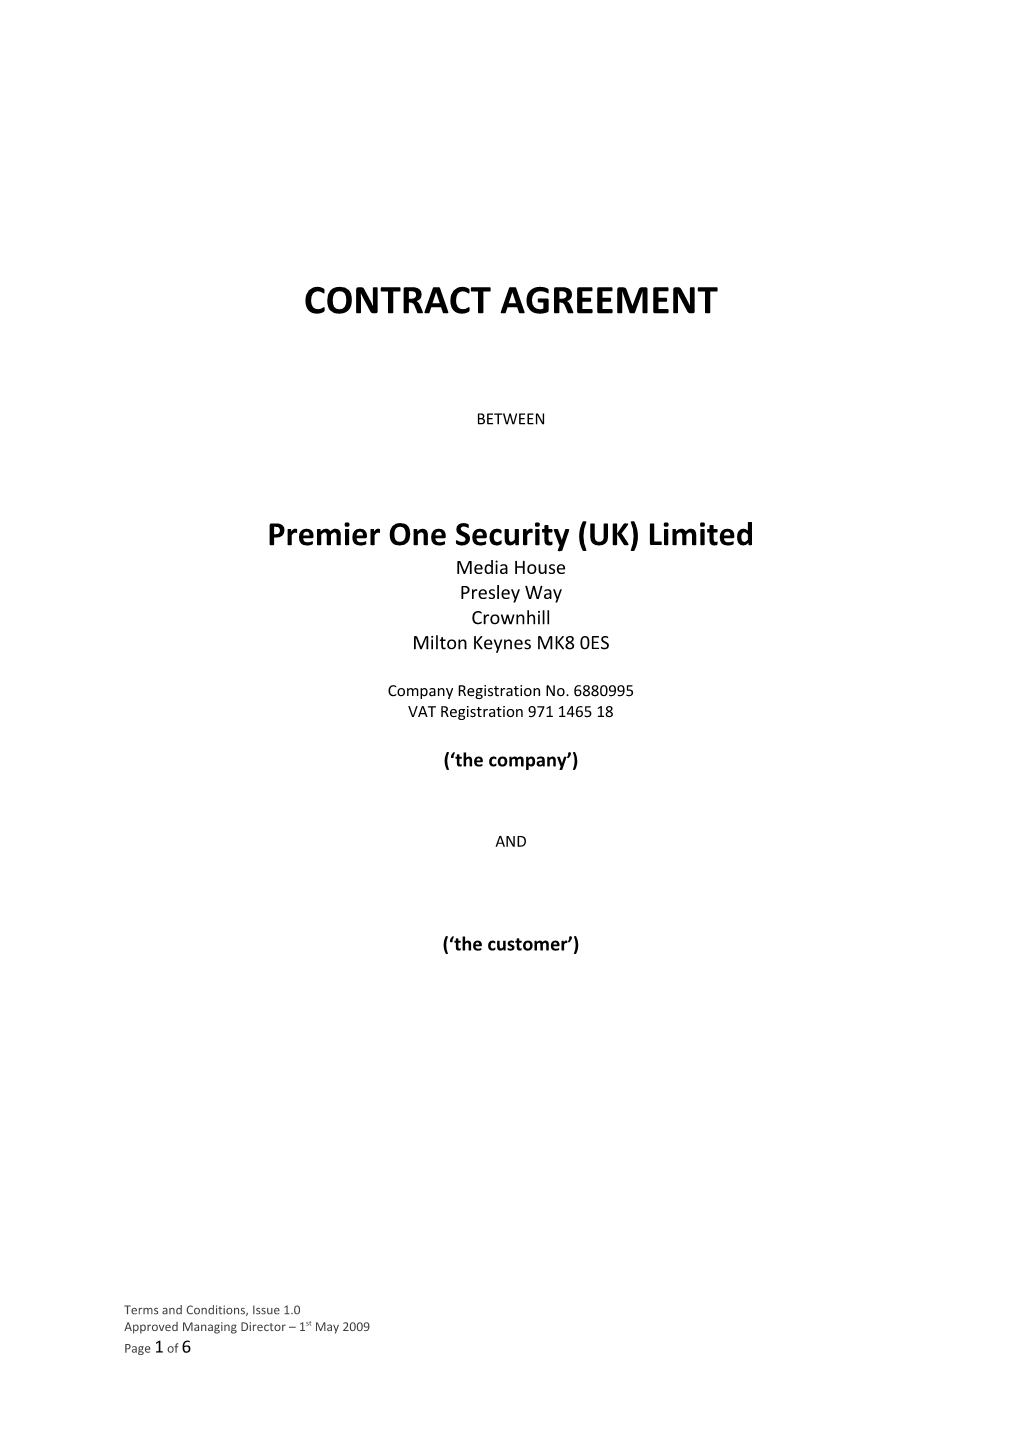 Premier One Security (UK) Limited